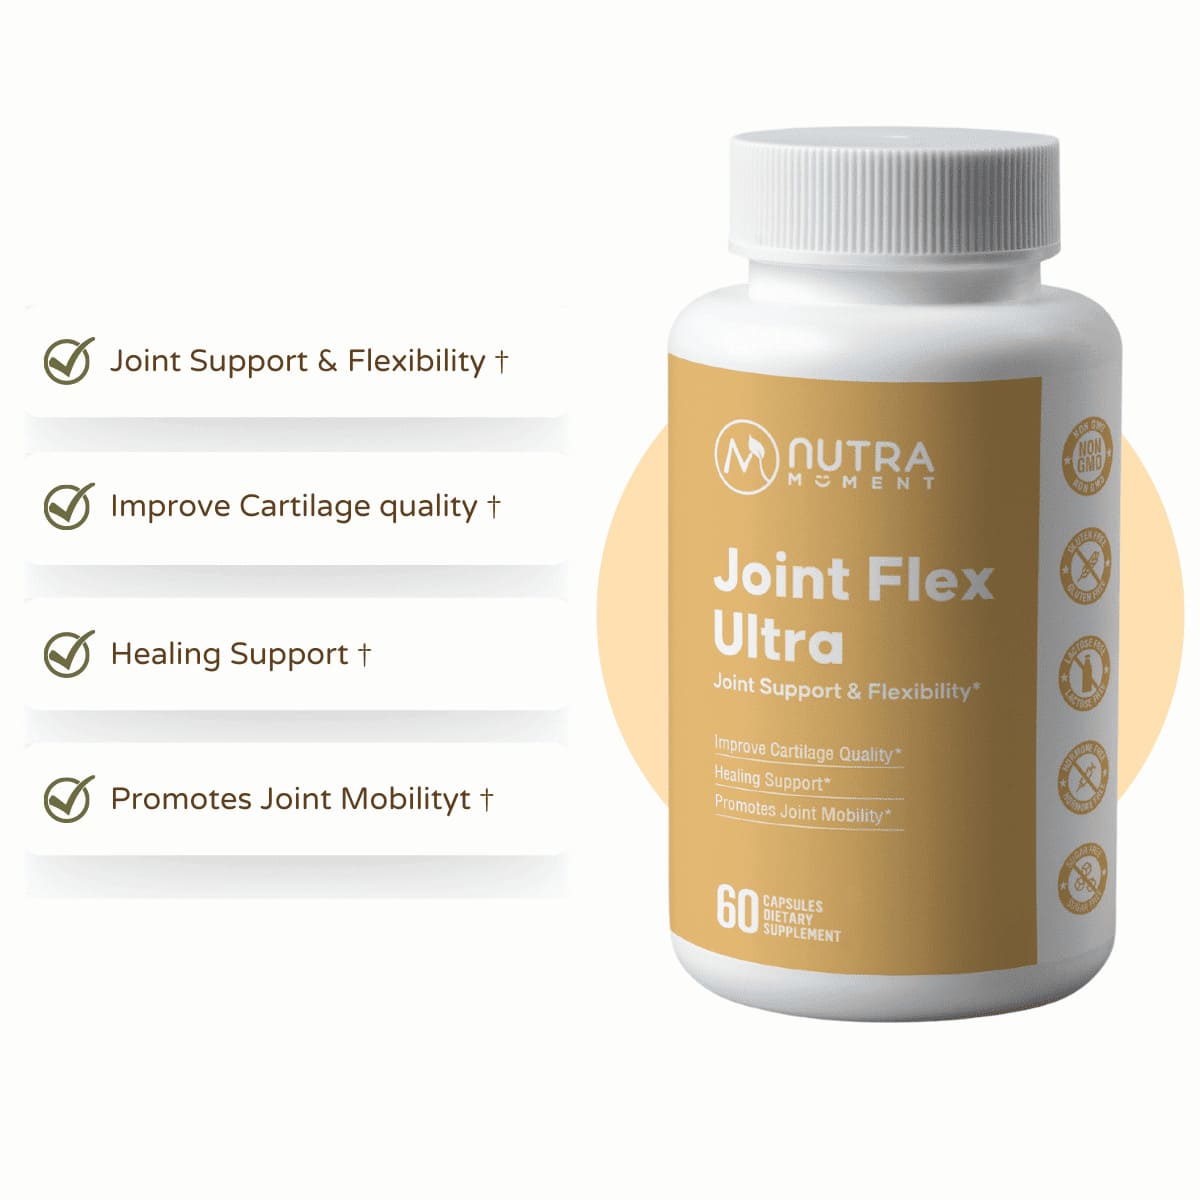 Nutra Moment | Joint Flex Ultra | Product Highlights & Benefits